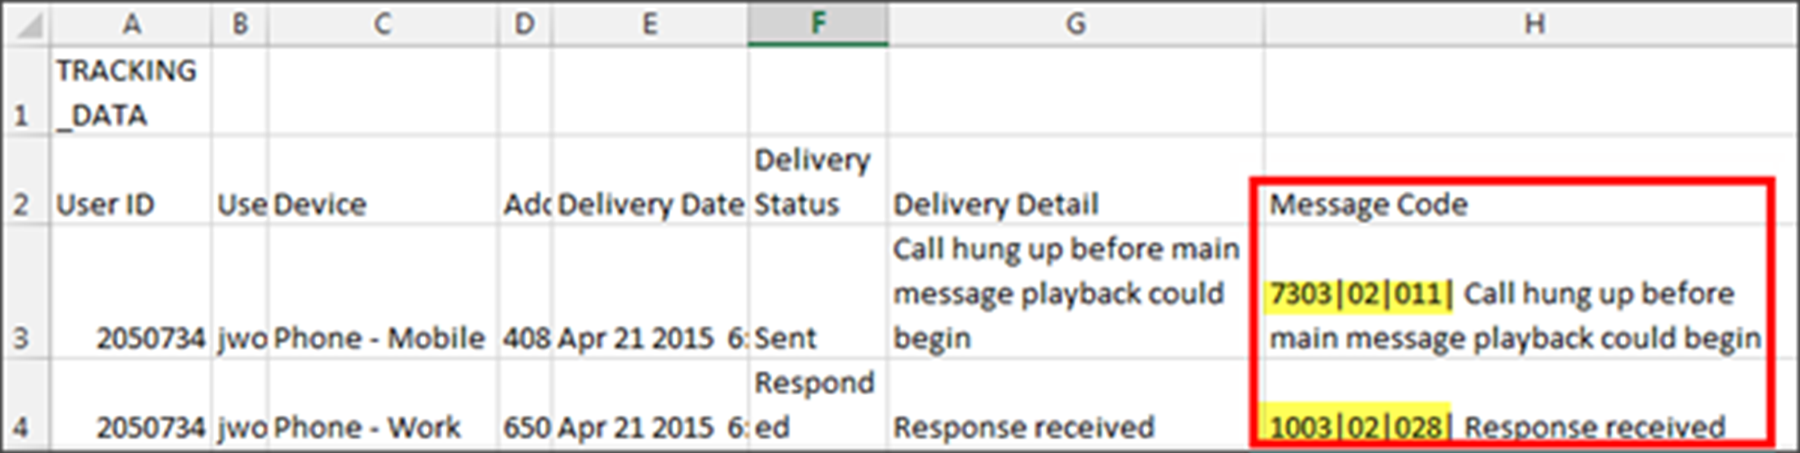 Exported CSV file of a tracking report with call message codes highlighted